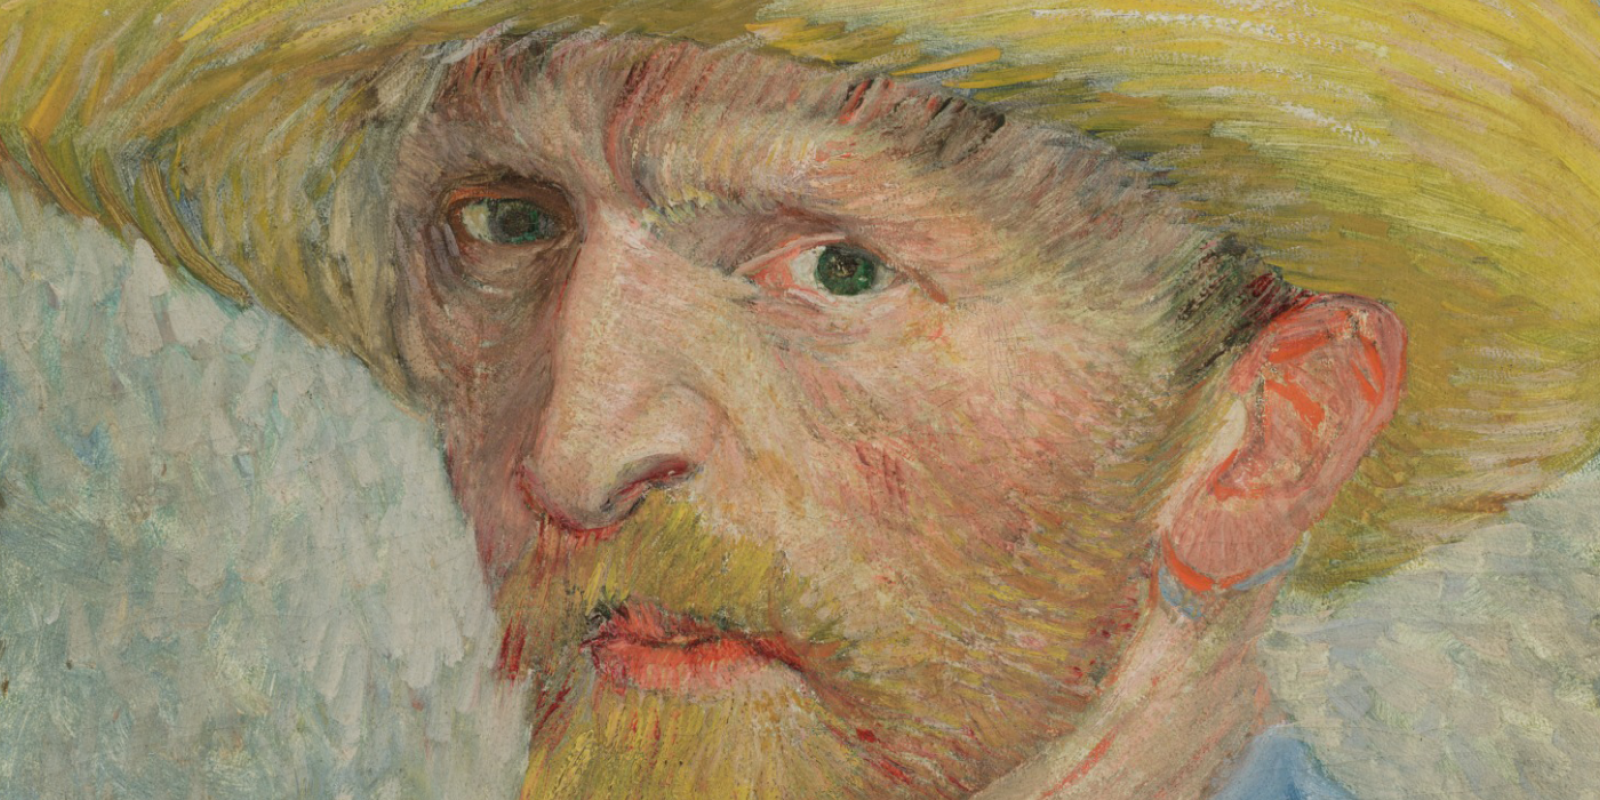 70 paintings in 70 days: Van Gogh's astonishing achievement at the end of  his life